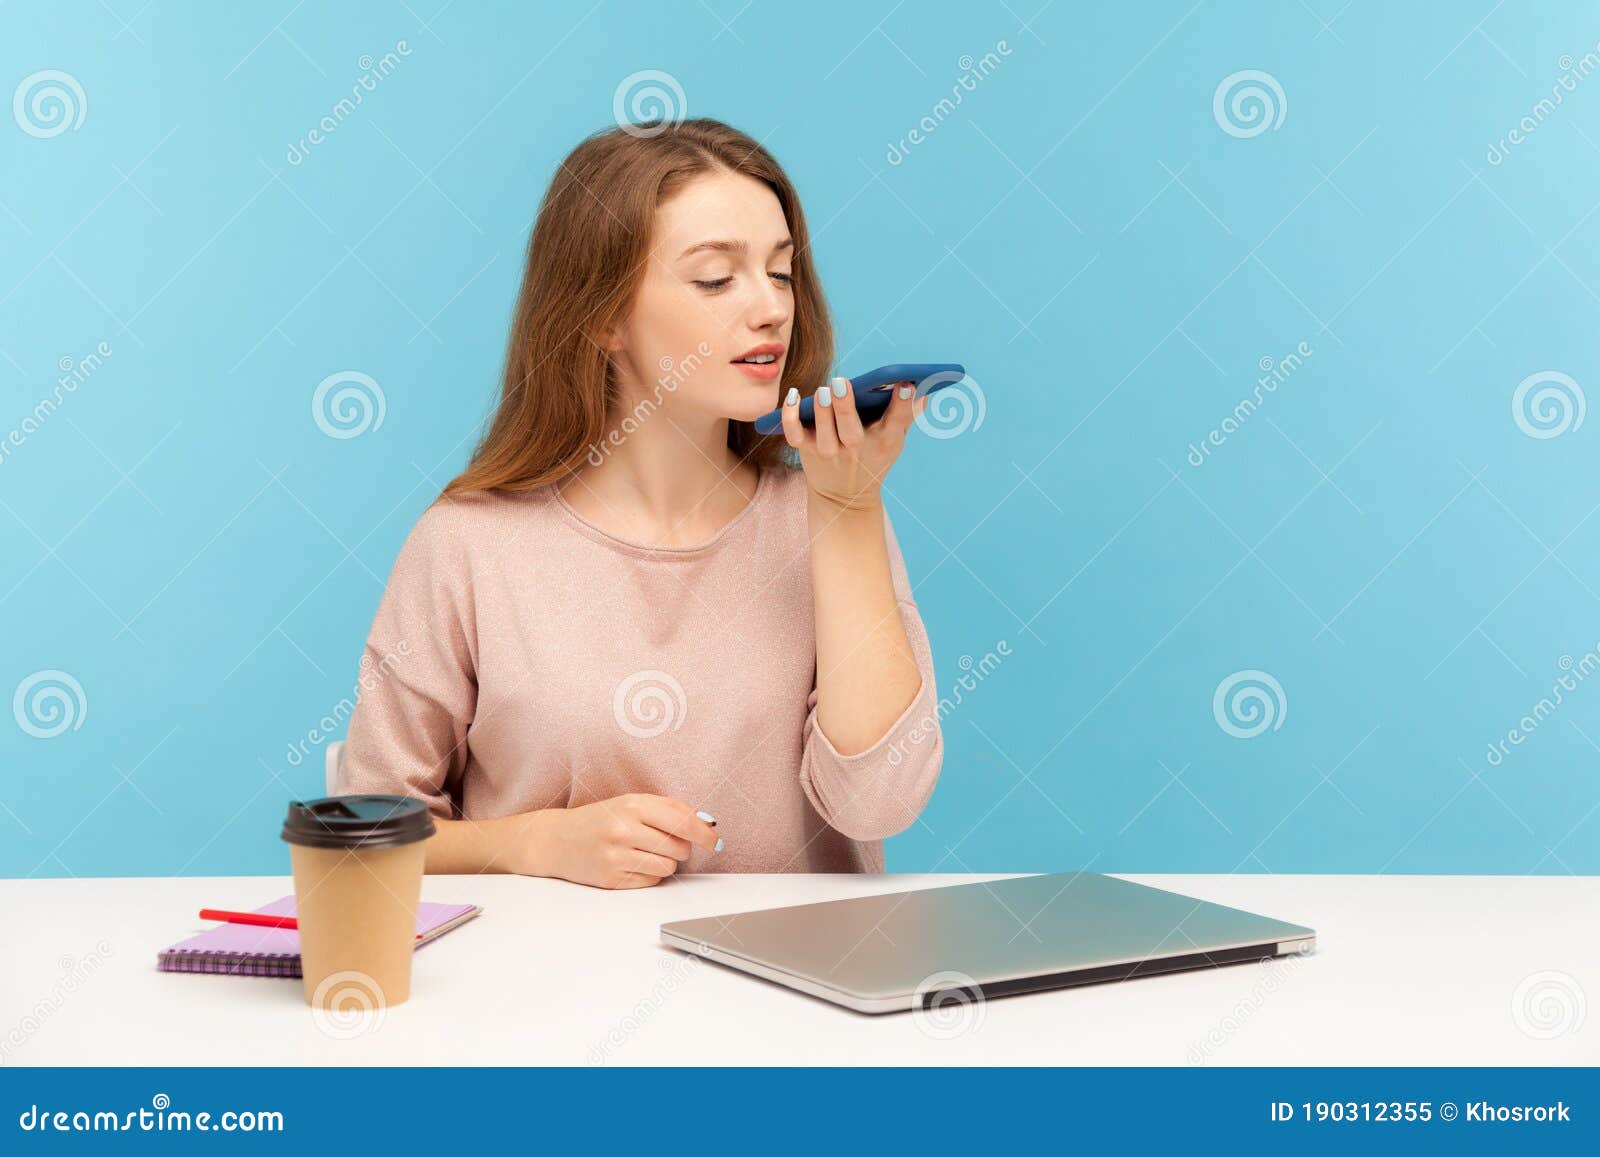 digital speaker app. young woman employee sitting at workplace and talking to mobile phone, using voice assistant